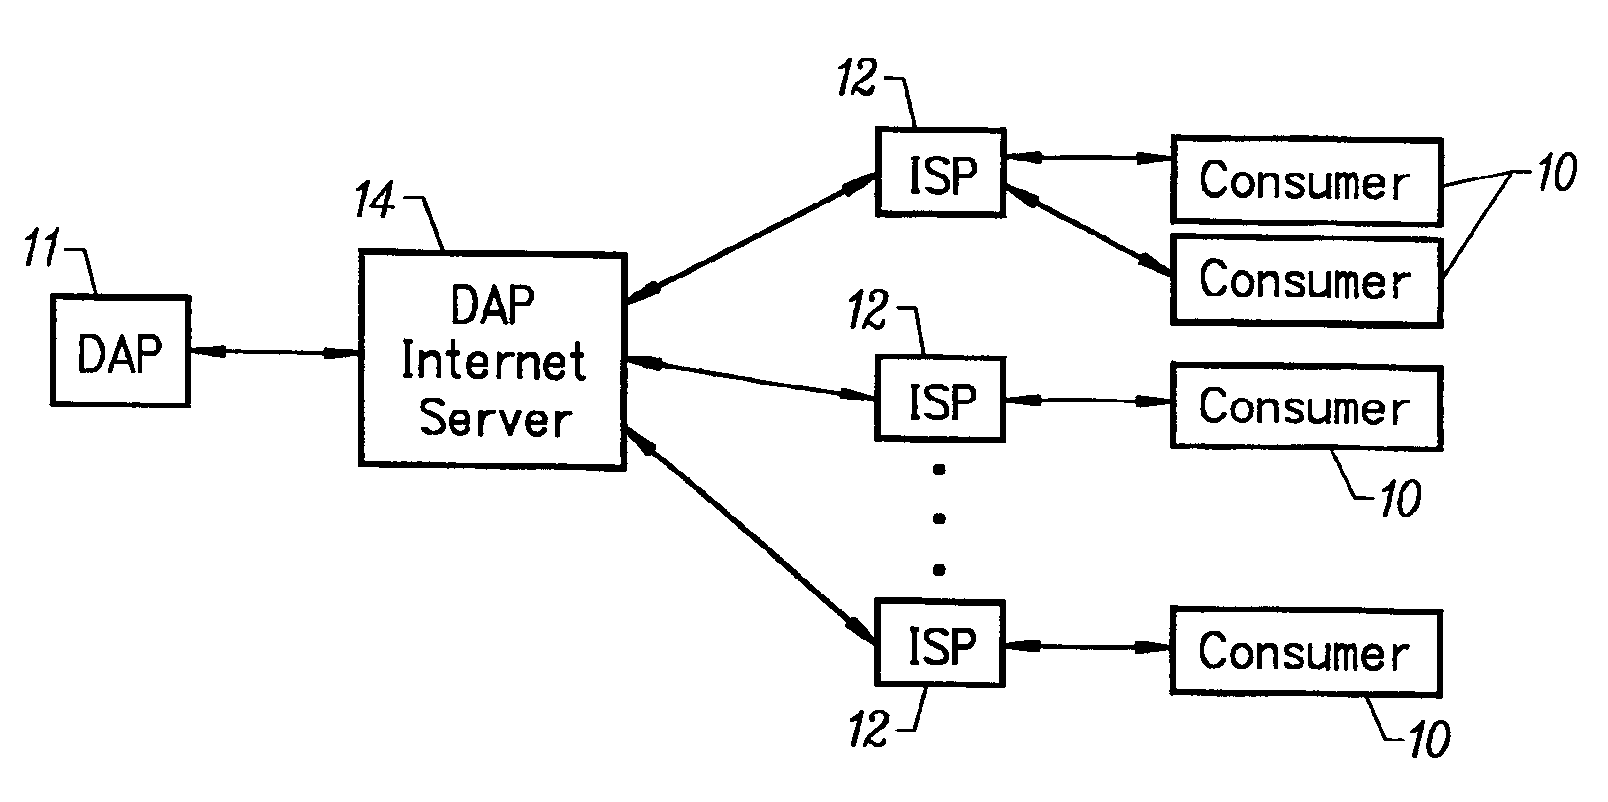 Method and system for distributing and reconciling electronic promotions